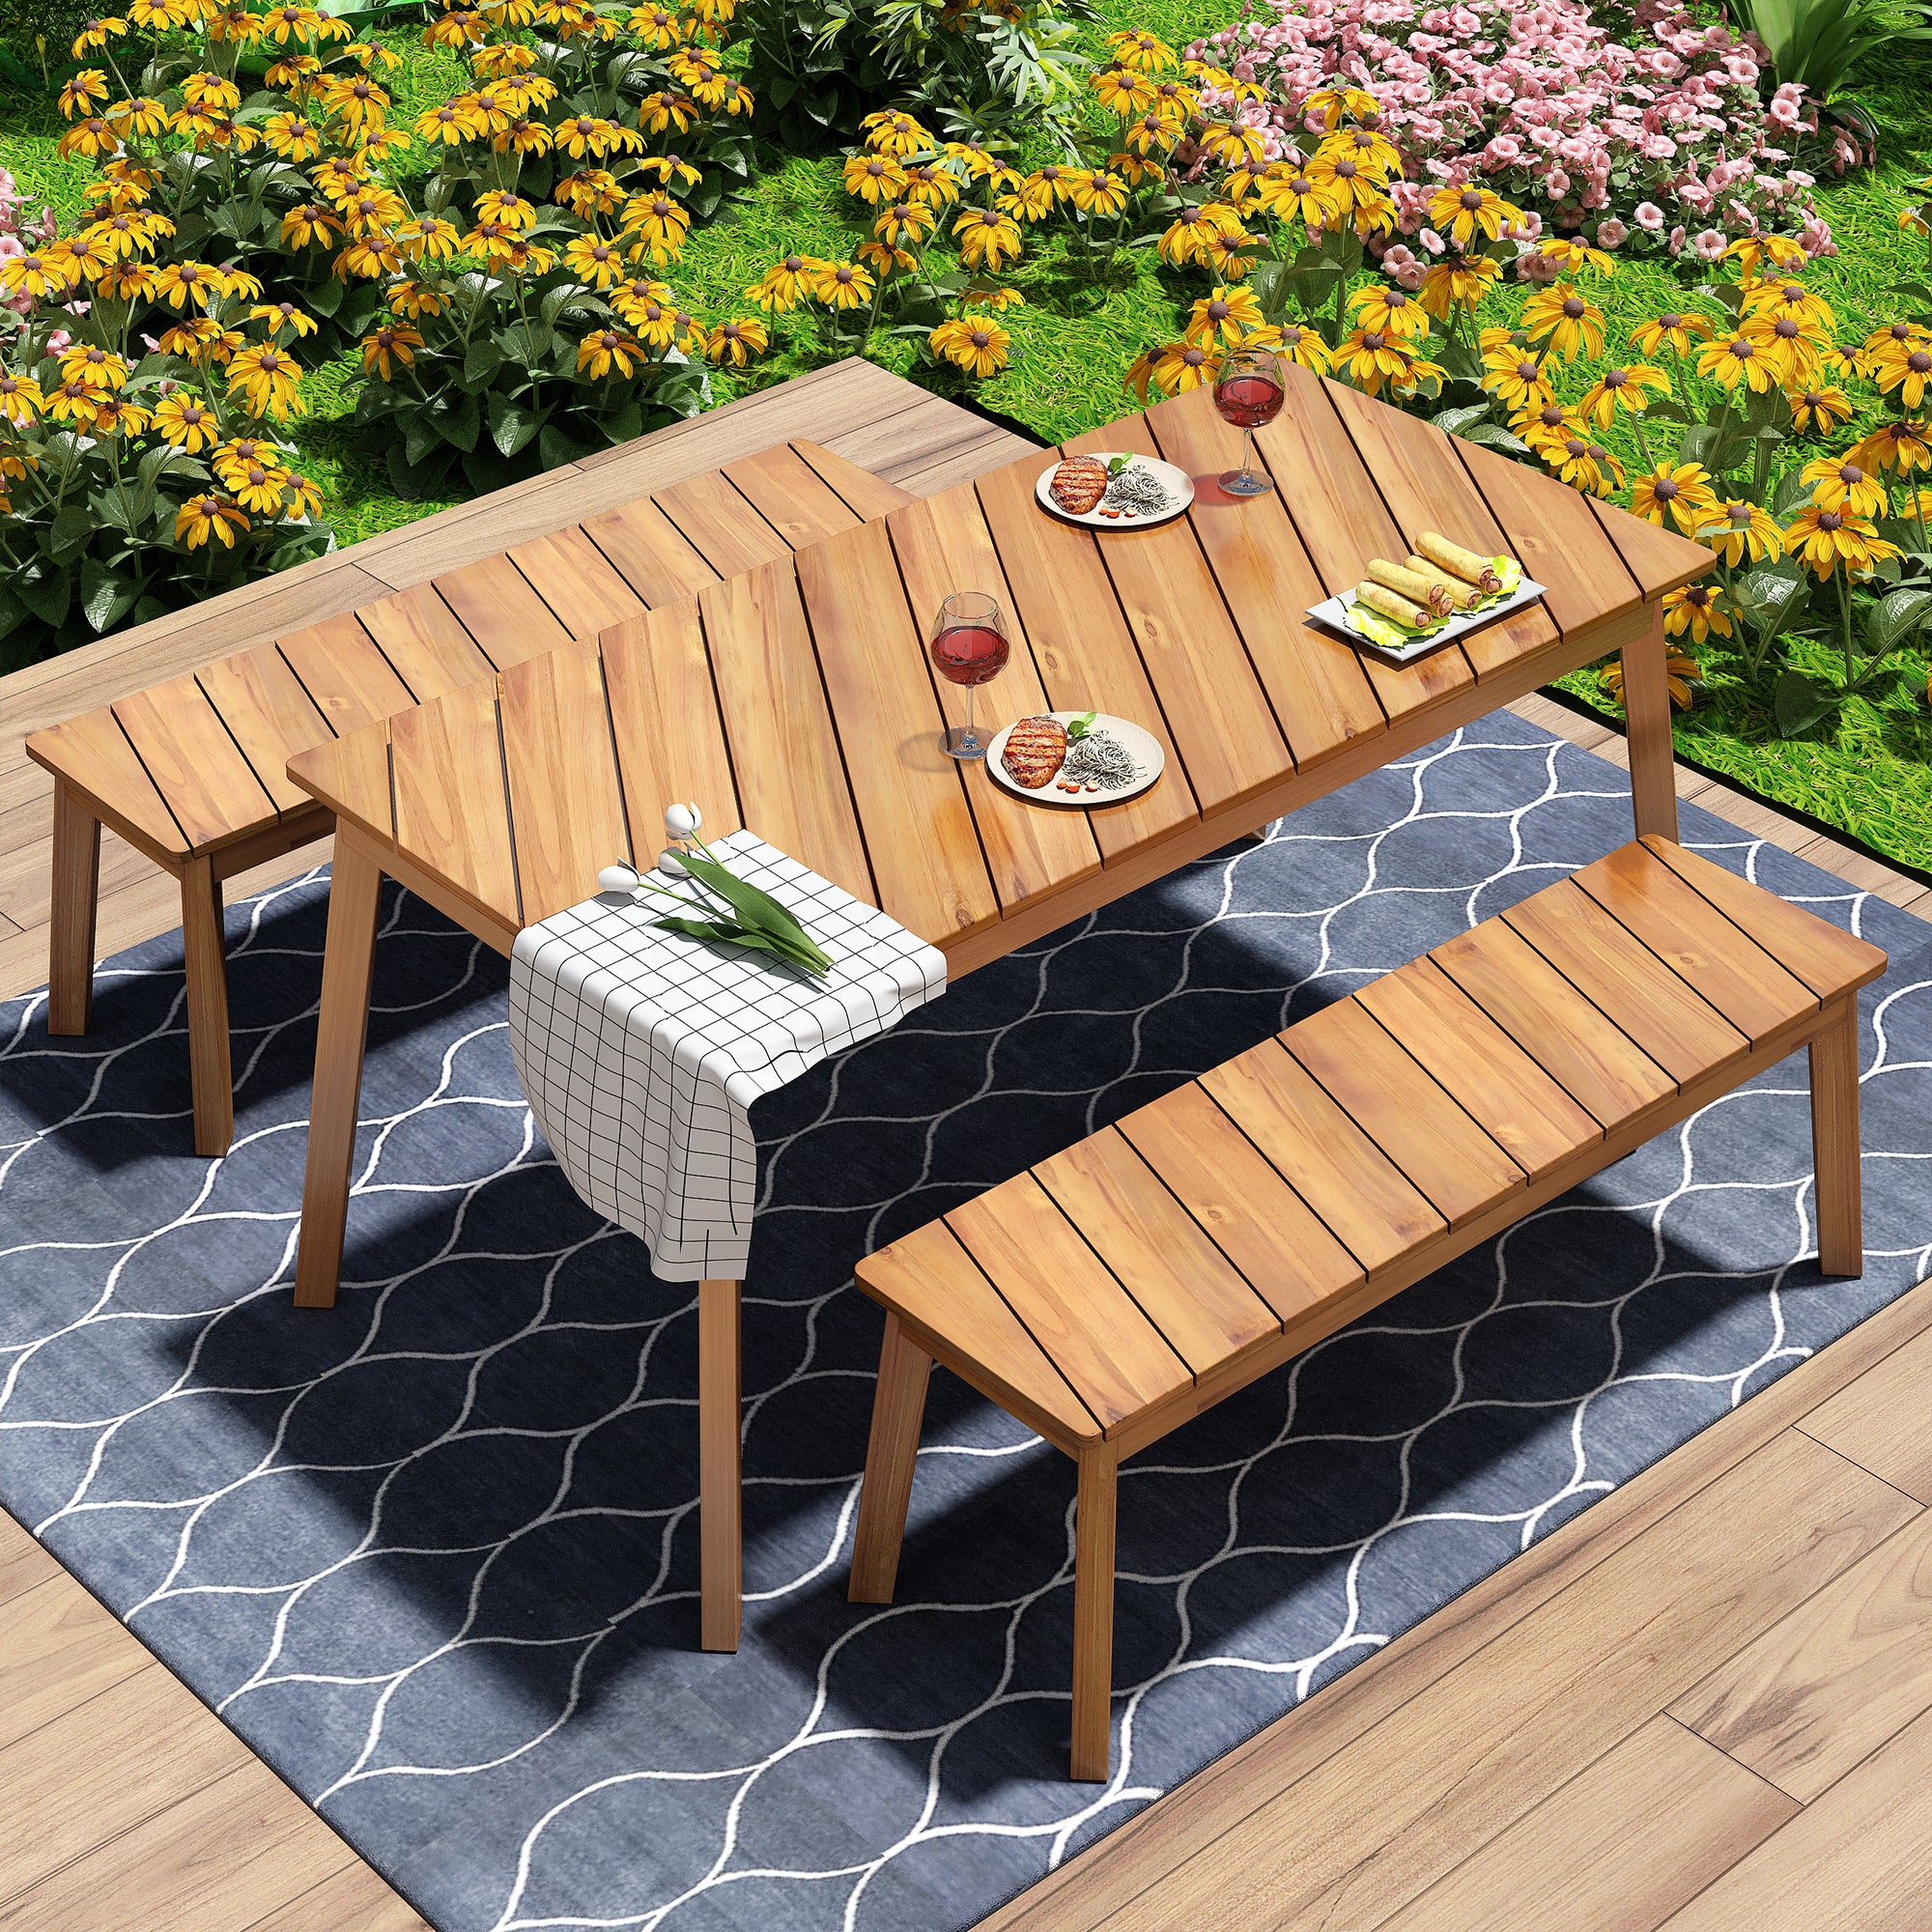 🆓🚛 Go 3 Pieces Acacia Wood Table Bench Dining Set for Outdoor & Indoor Furniture With 2 Benches, Picnic Beer Table for Patio, Porch, Garden, Poolside, Natural